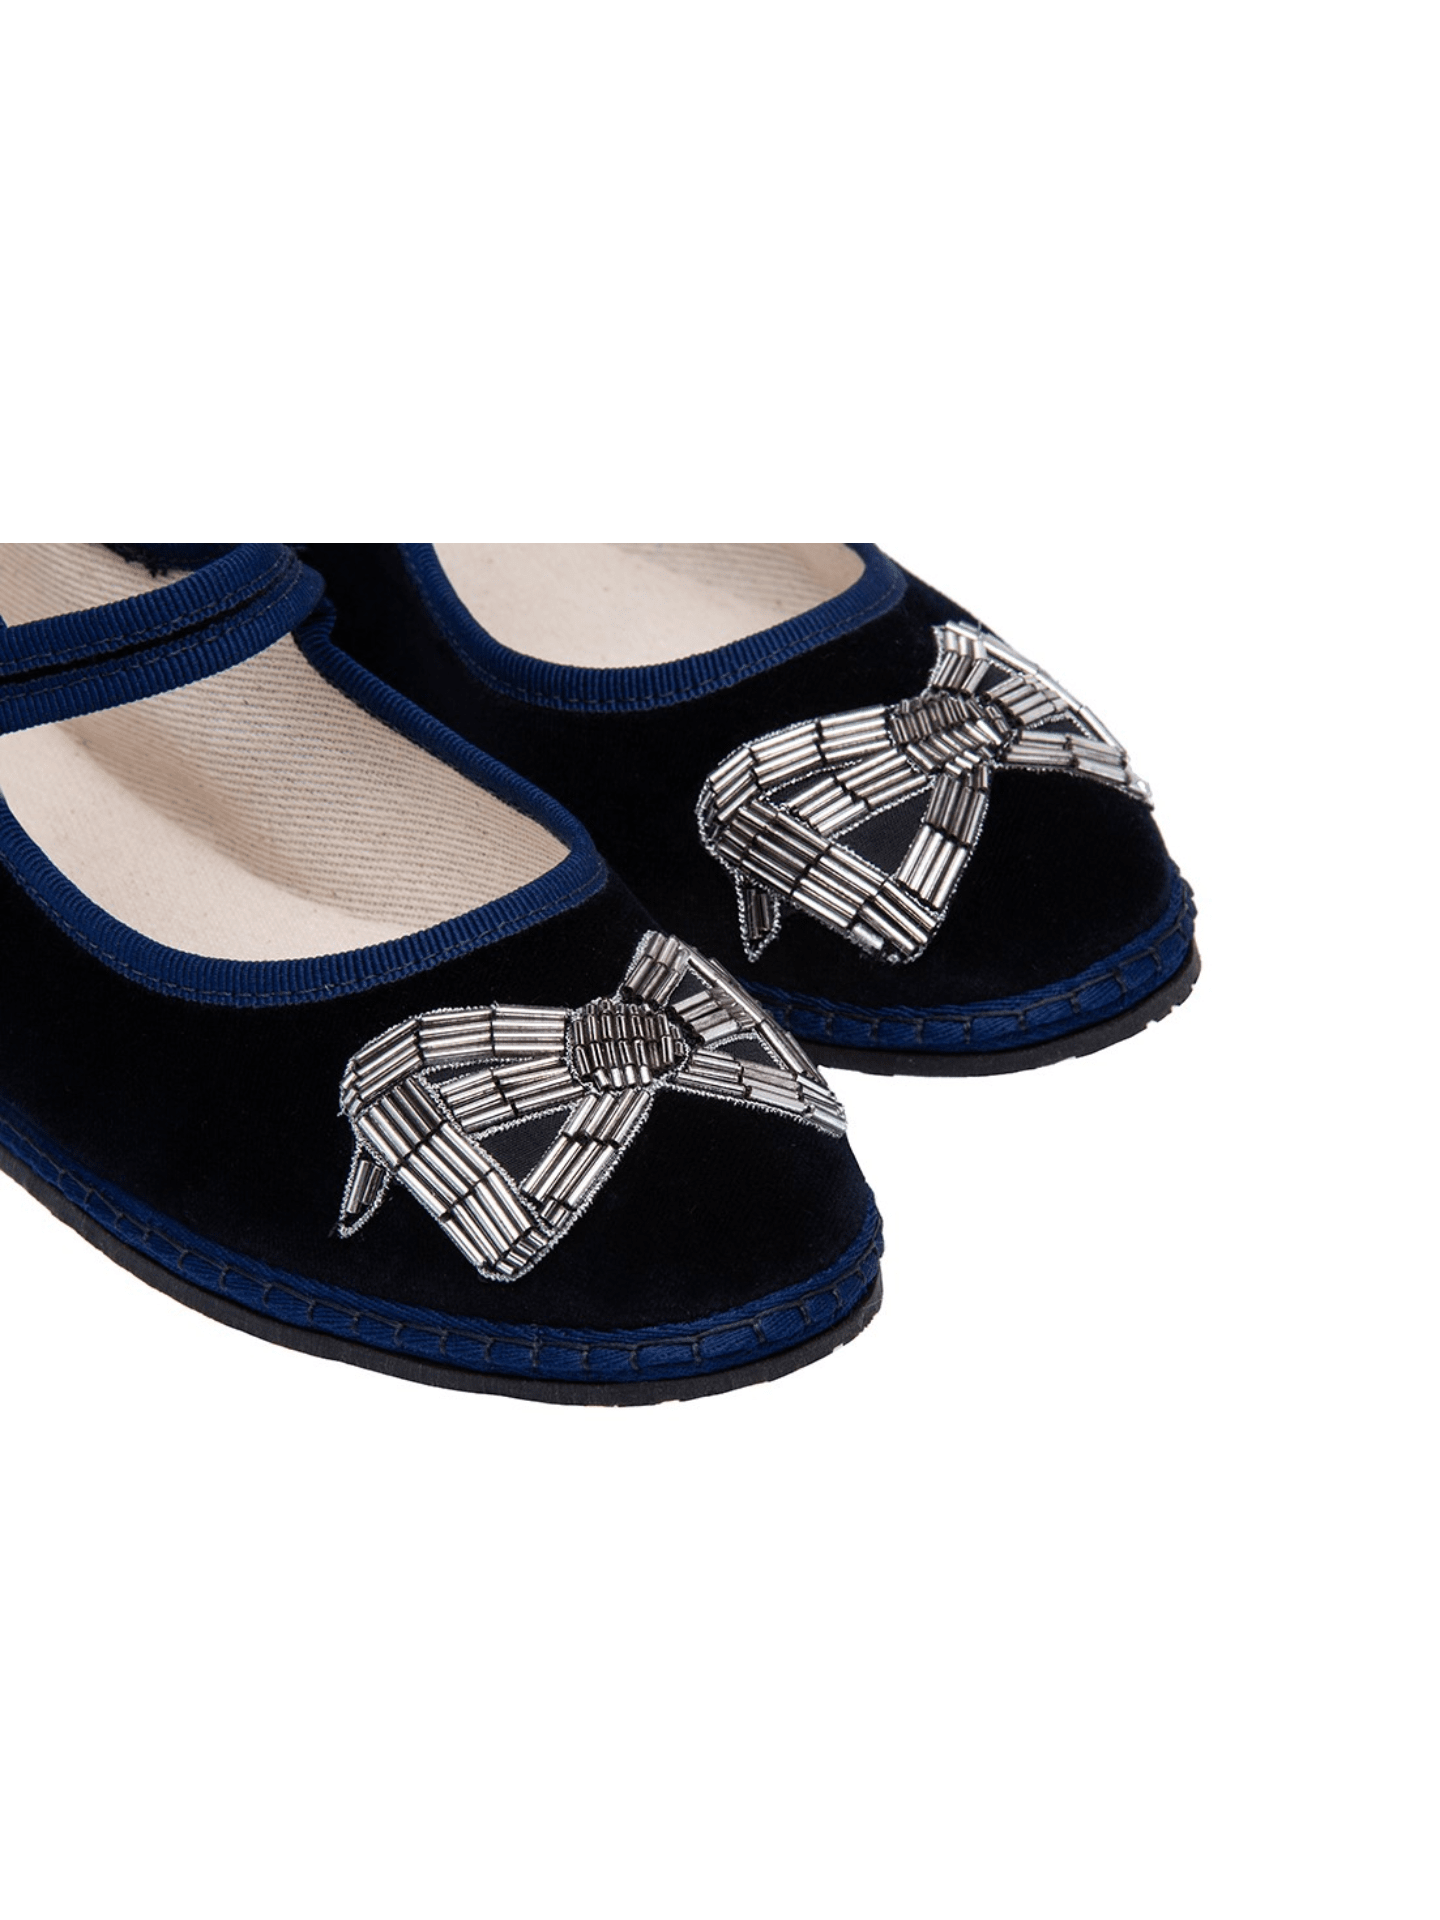 MJ Clementine Navy Bow Embroidery